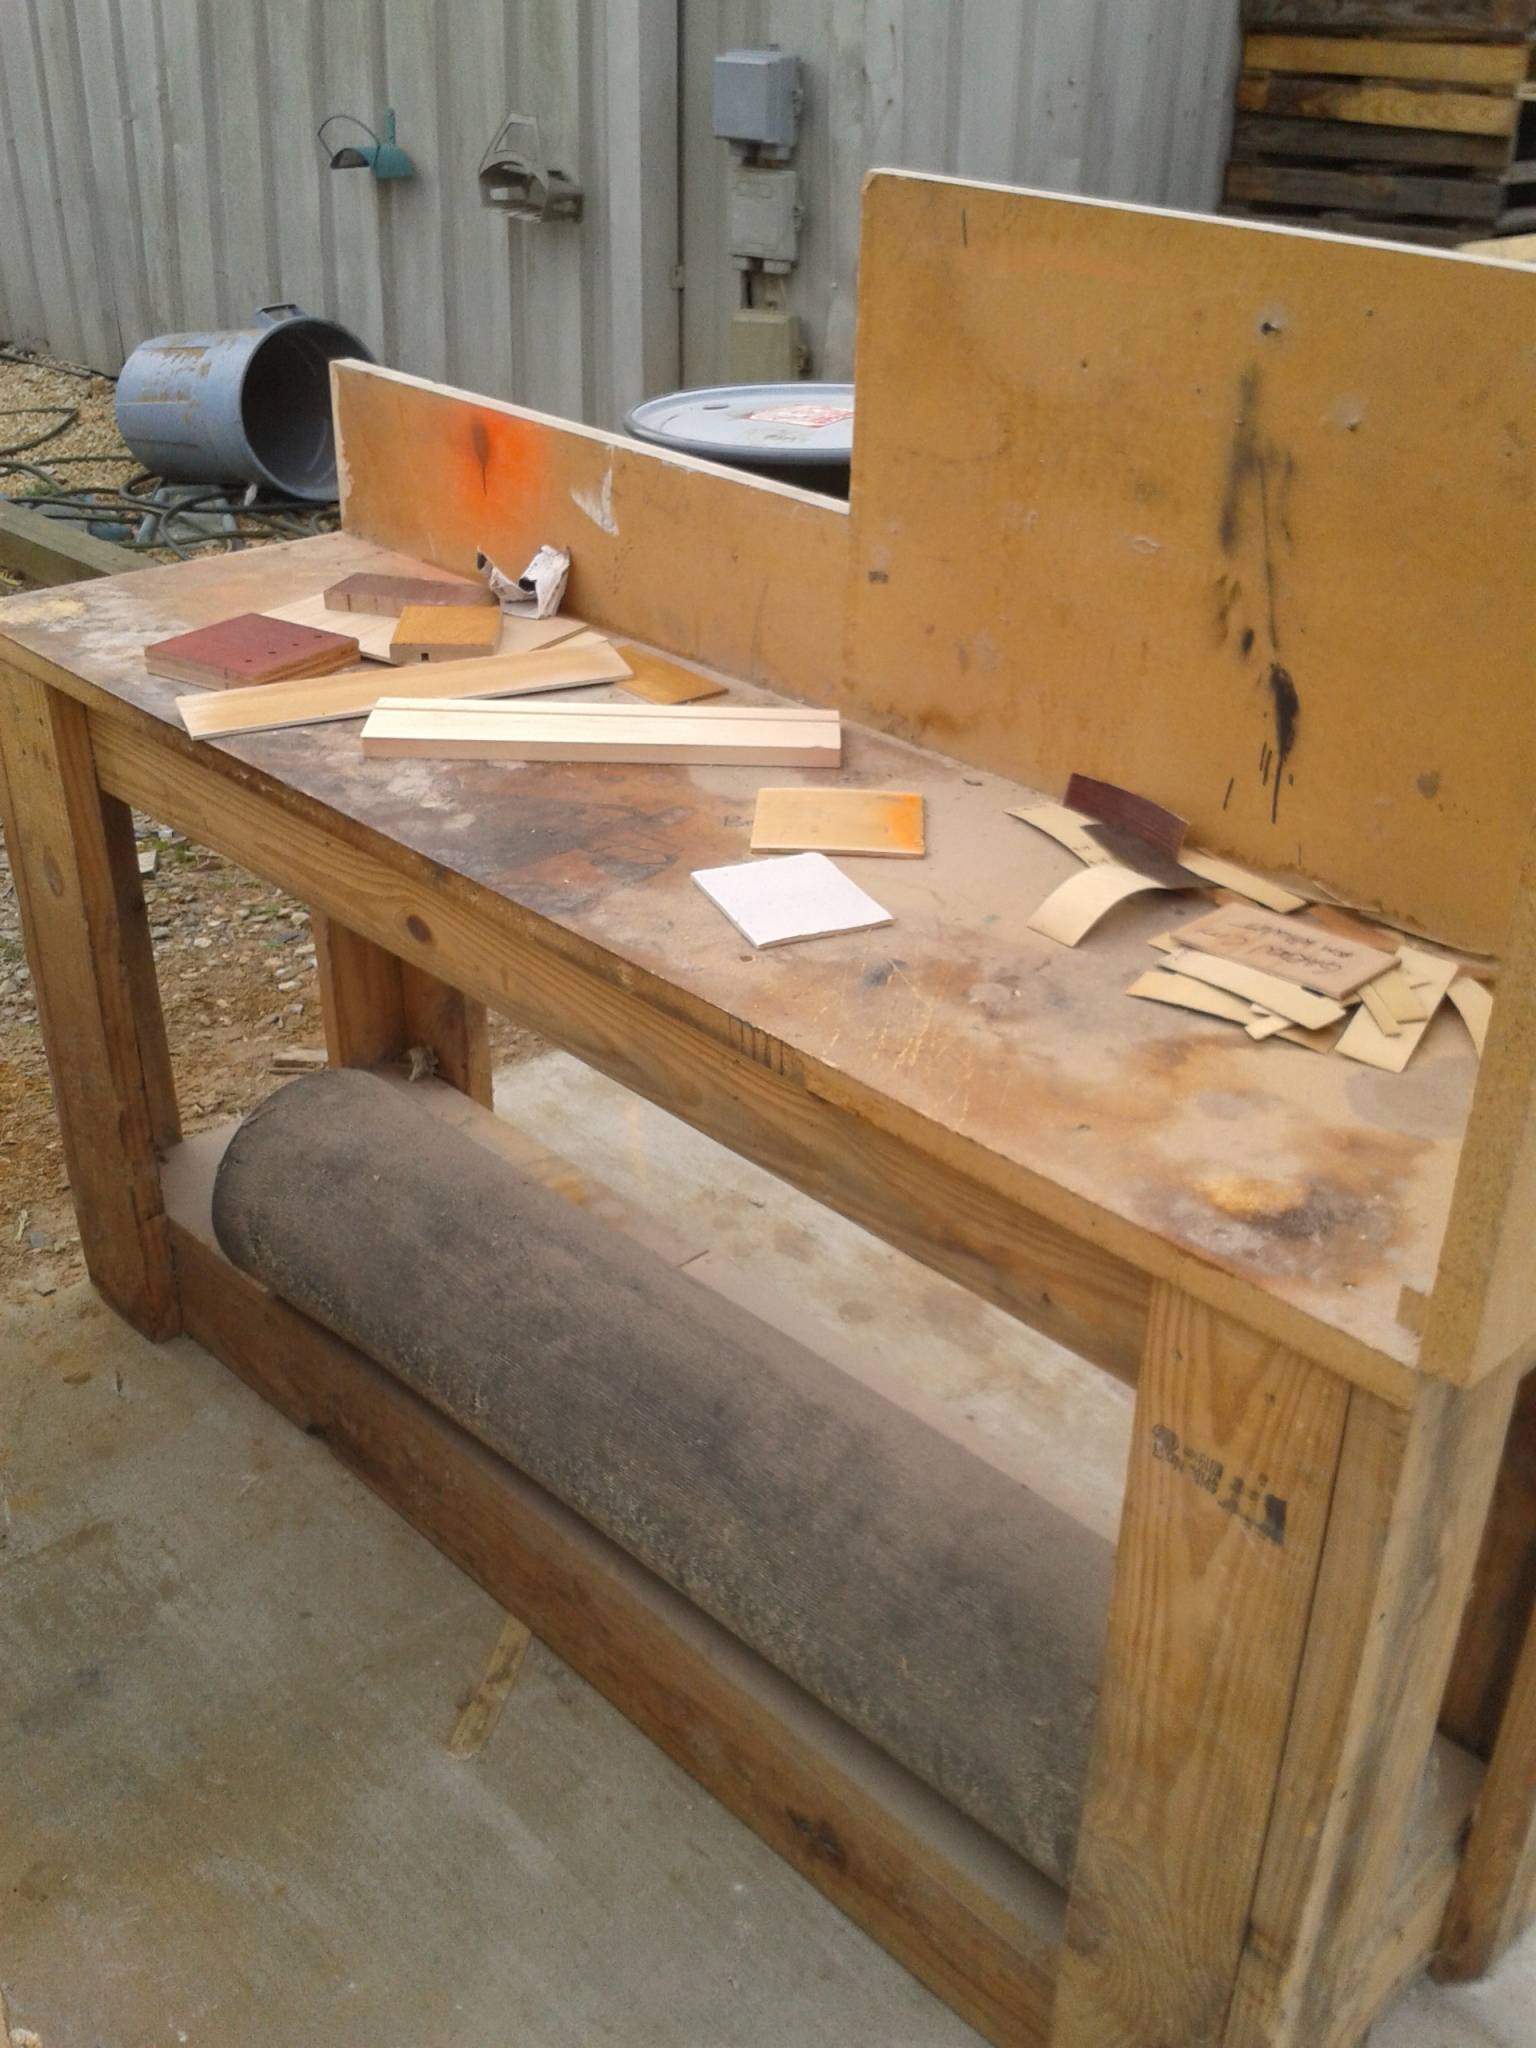 Work tables